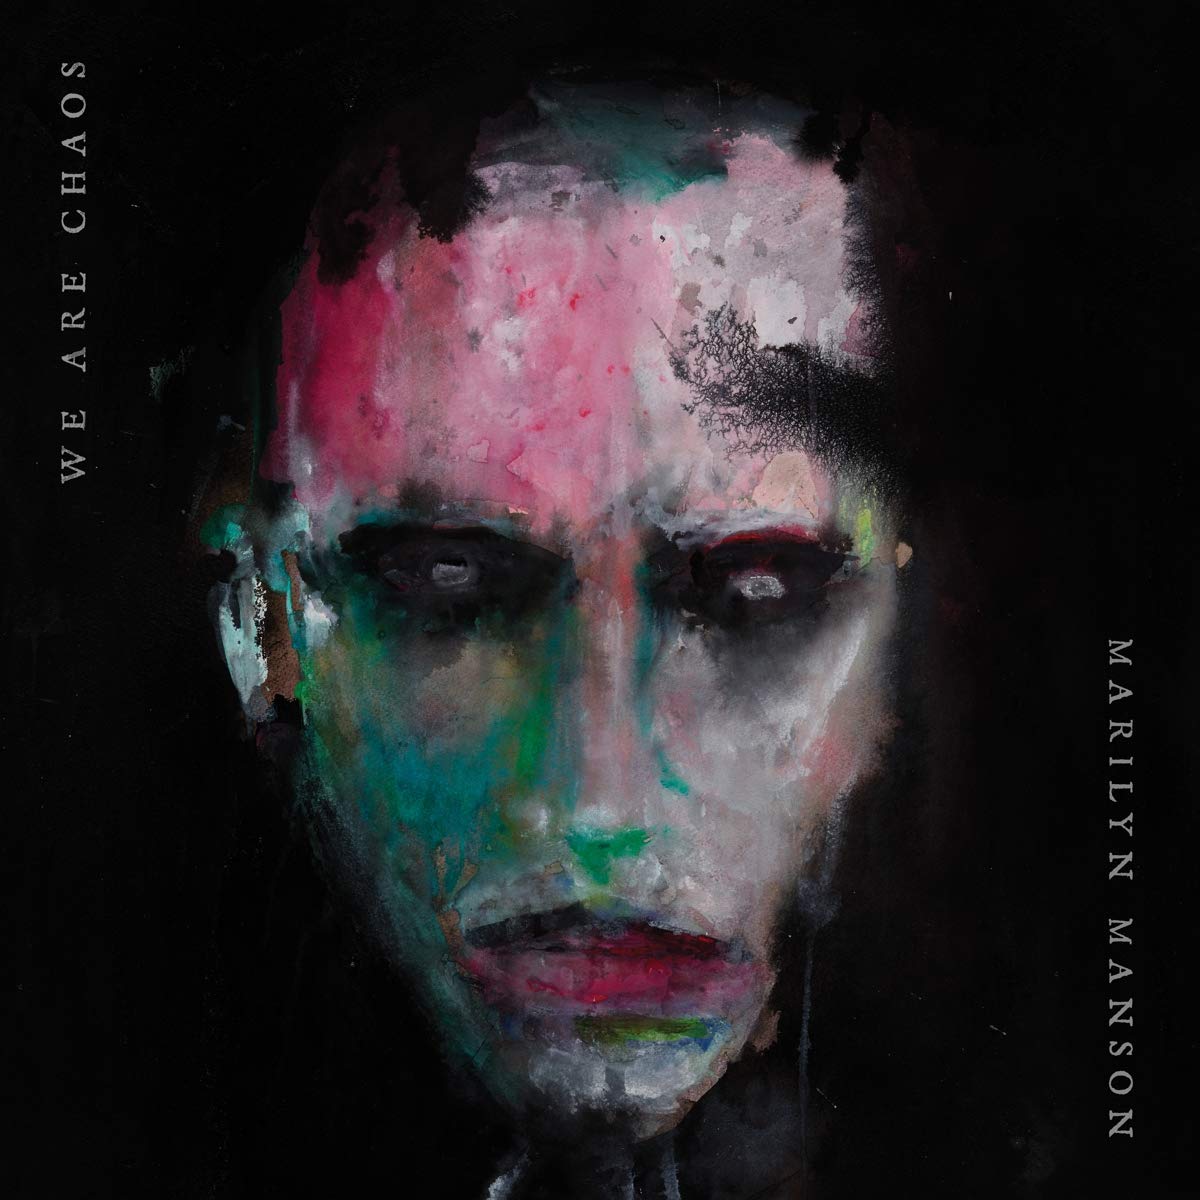 Marilyn Manson - 'We Are Chaos' LP (including 24x24 poster).